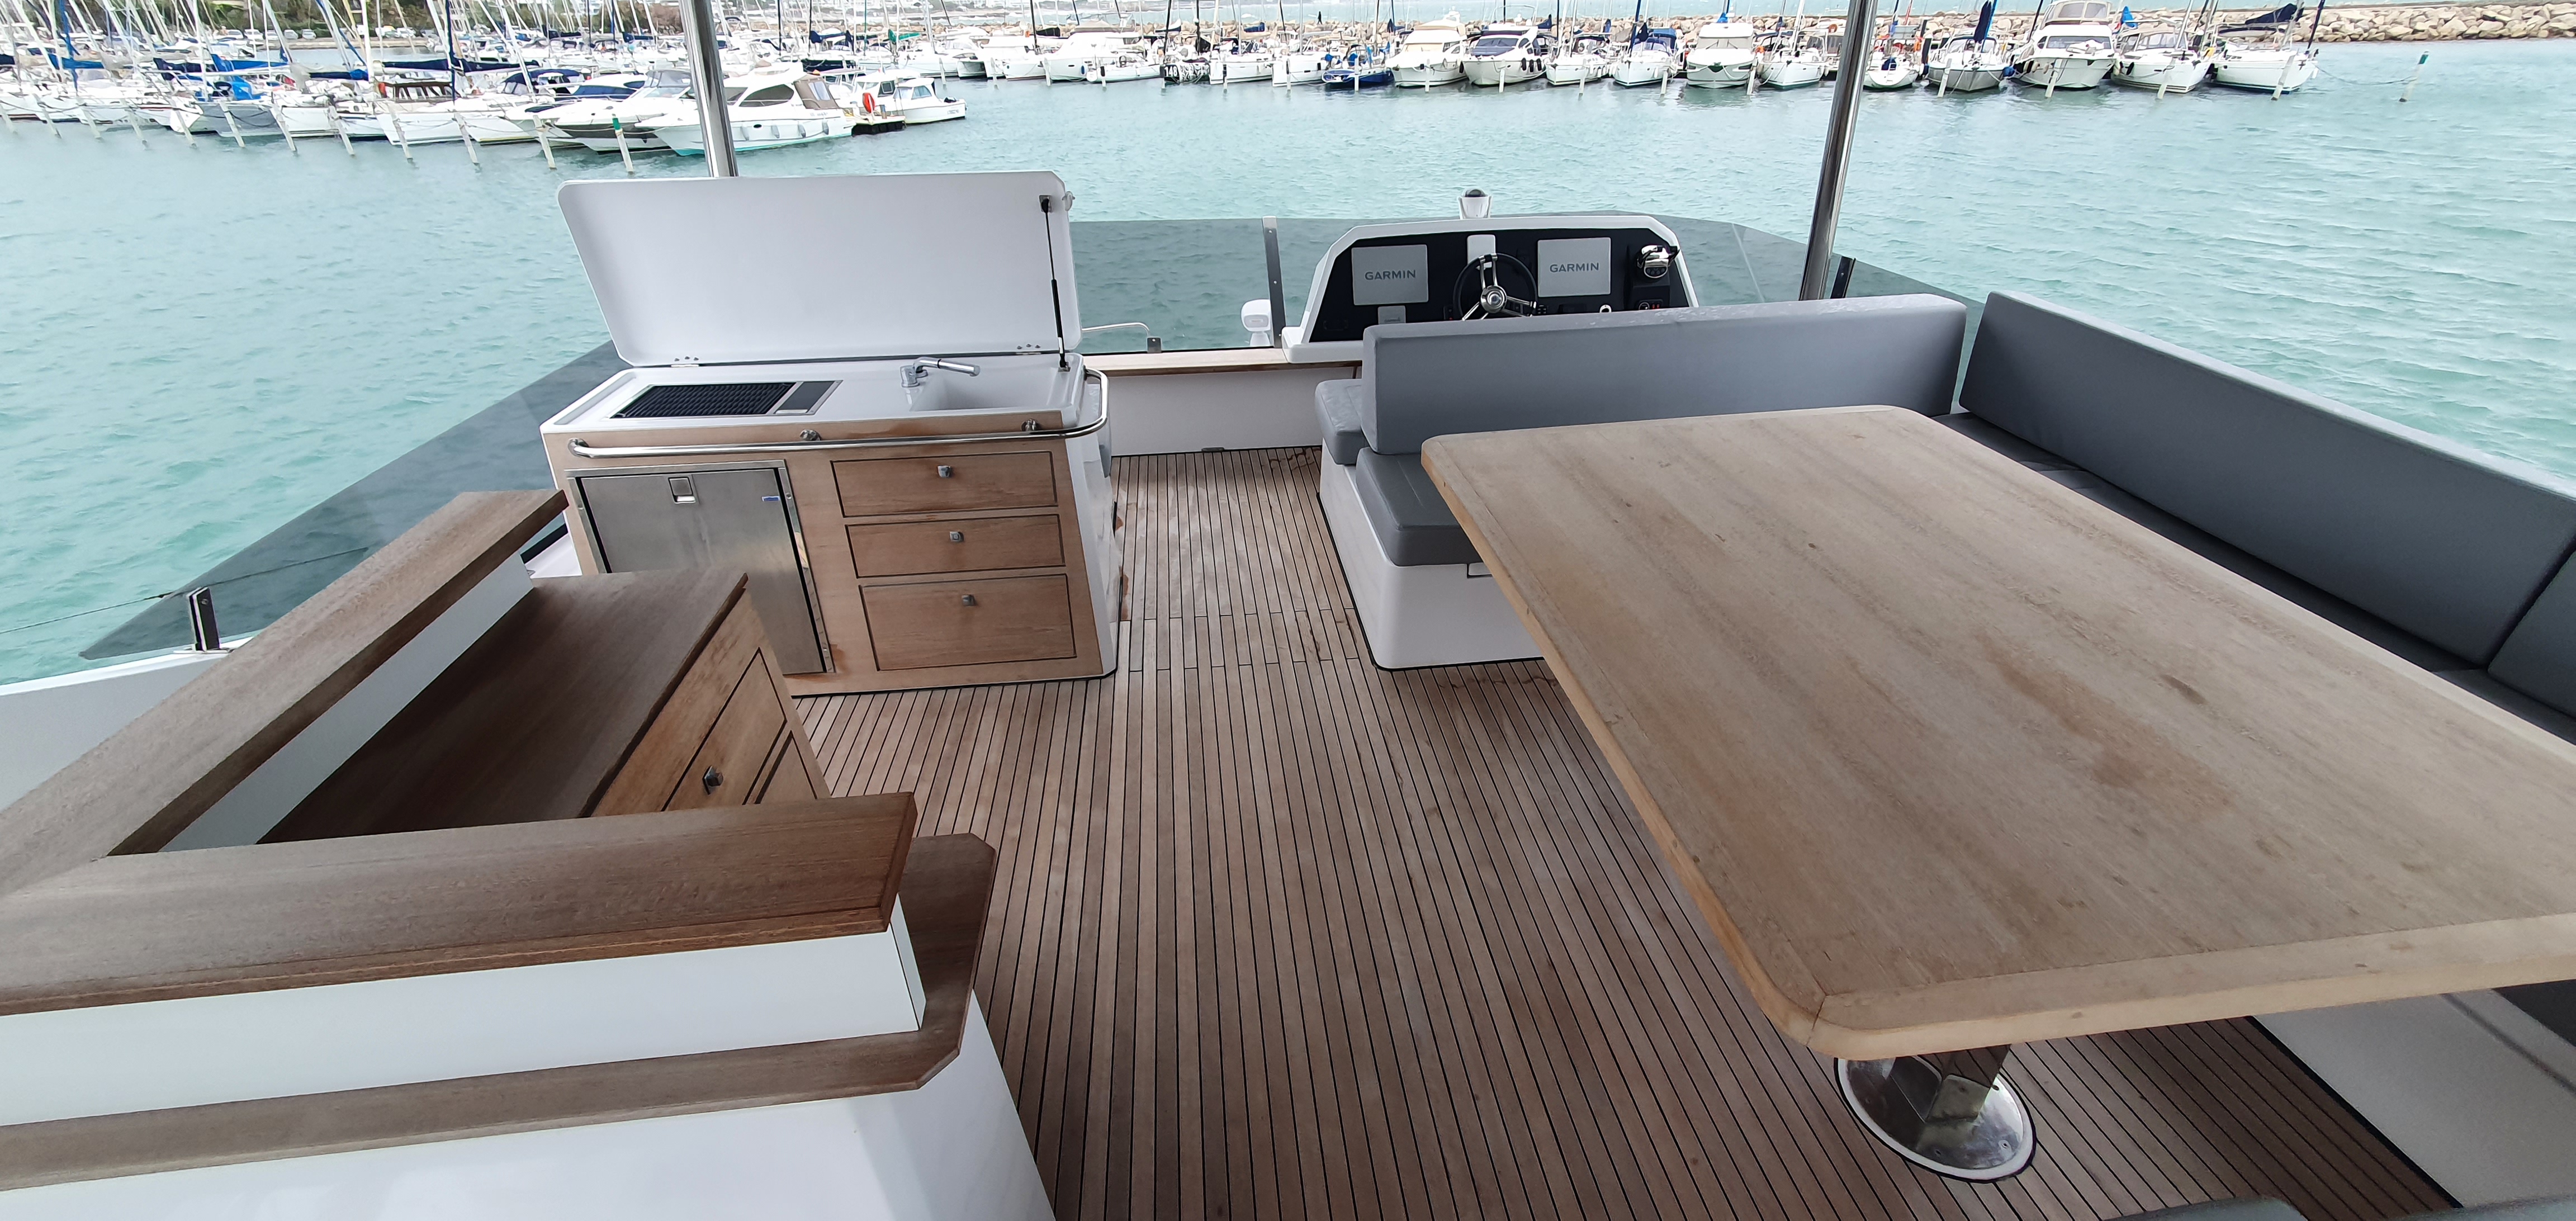 Aventura 50 MY - Luxury yacht charter France & Boat hire in France French Riviera Hyeres Hyeres 4